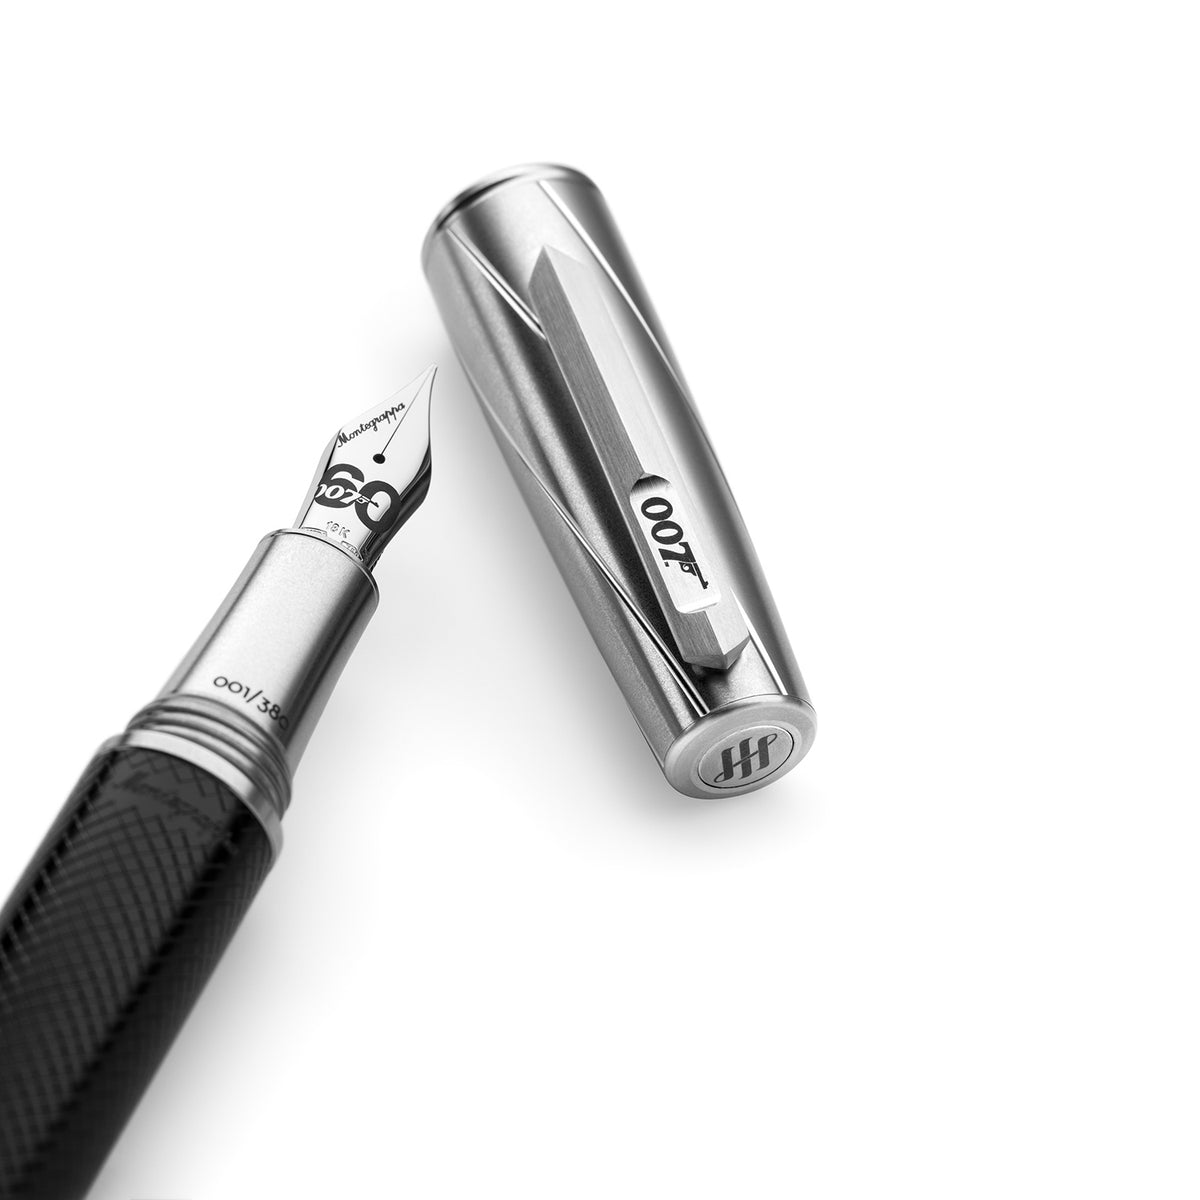 James Bond 007 Spymaster Duo Fountain Pen - Numbered Edition - By Montegrappa